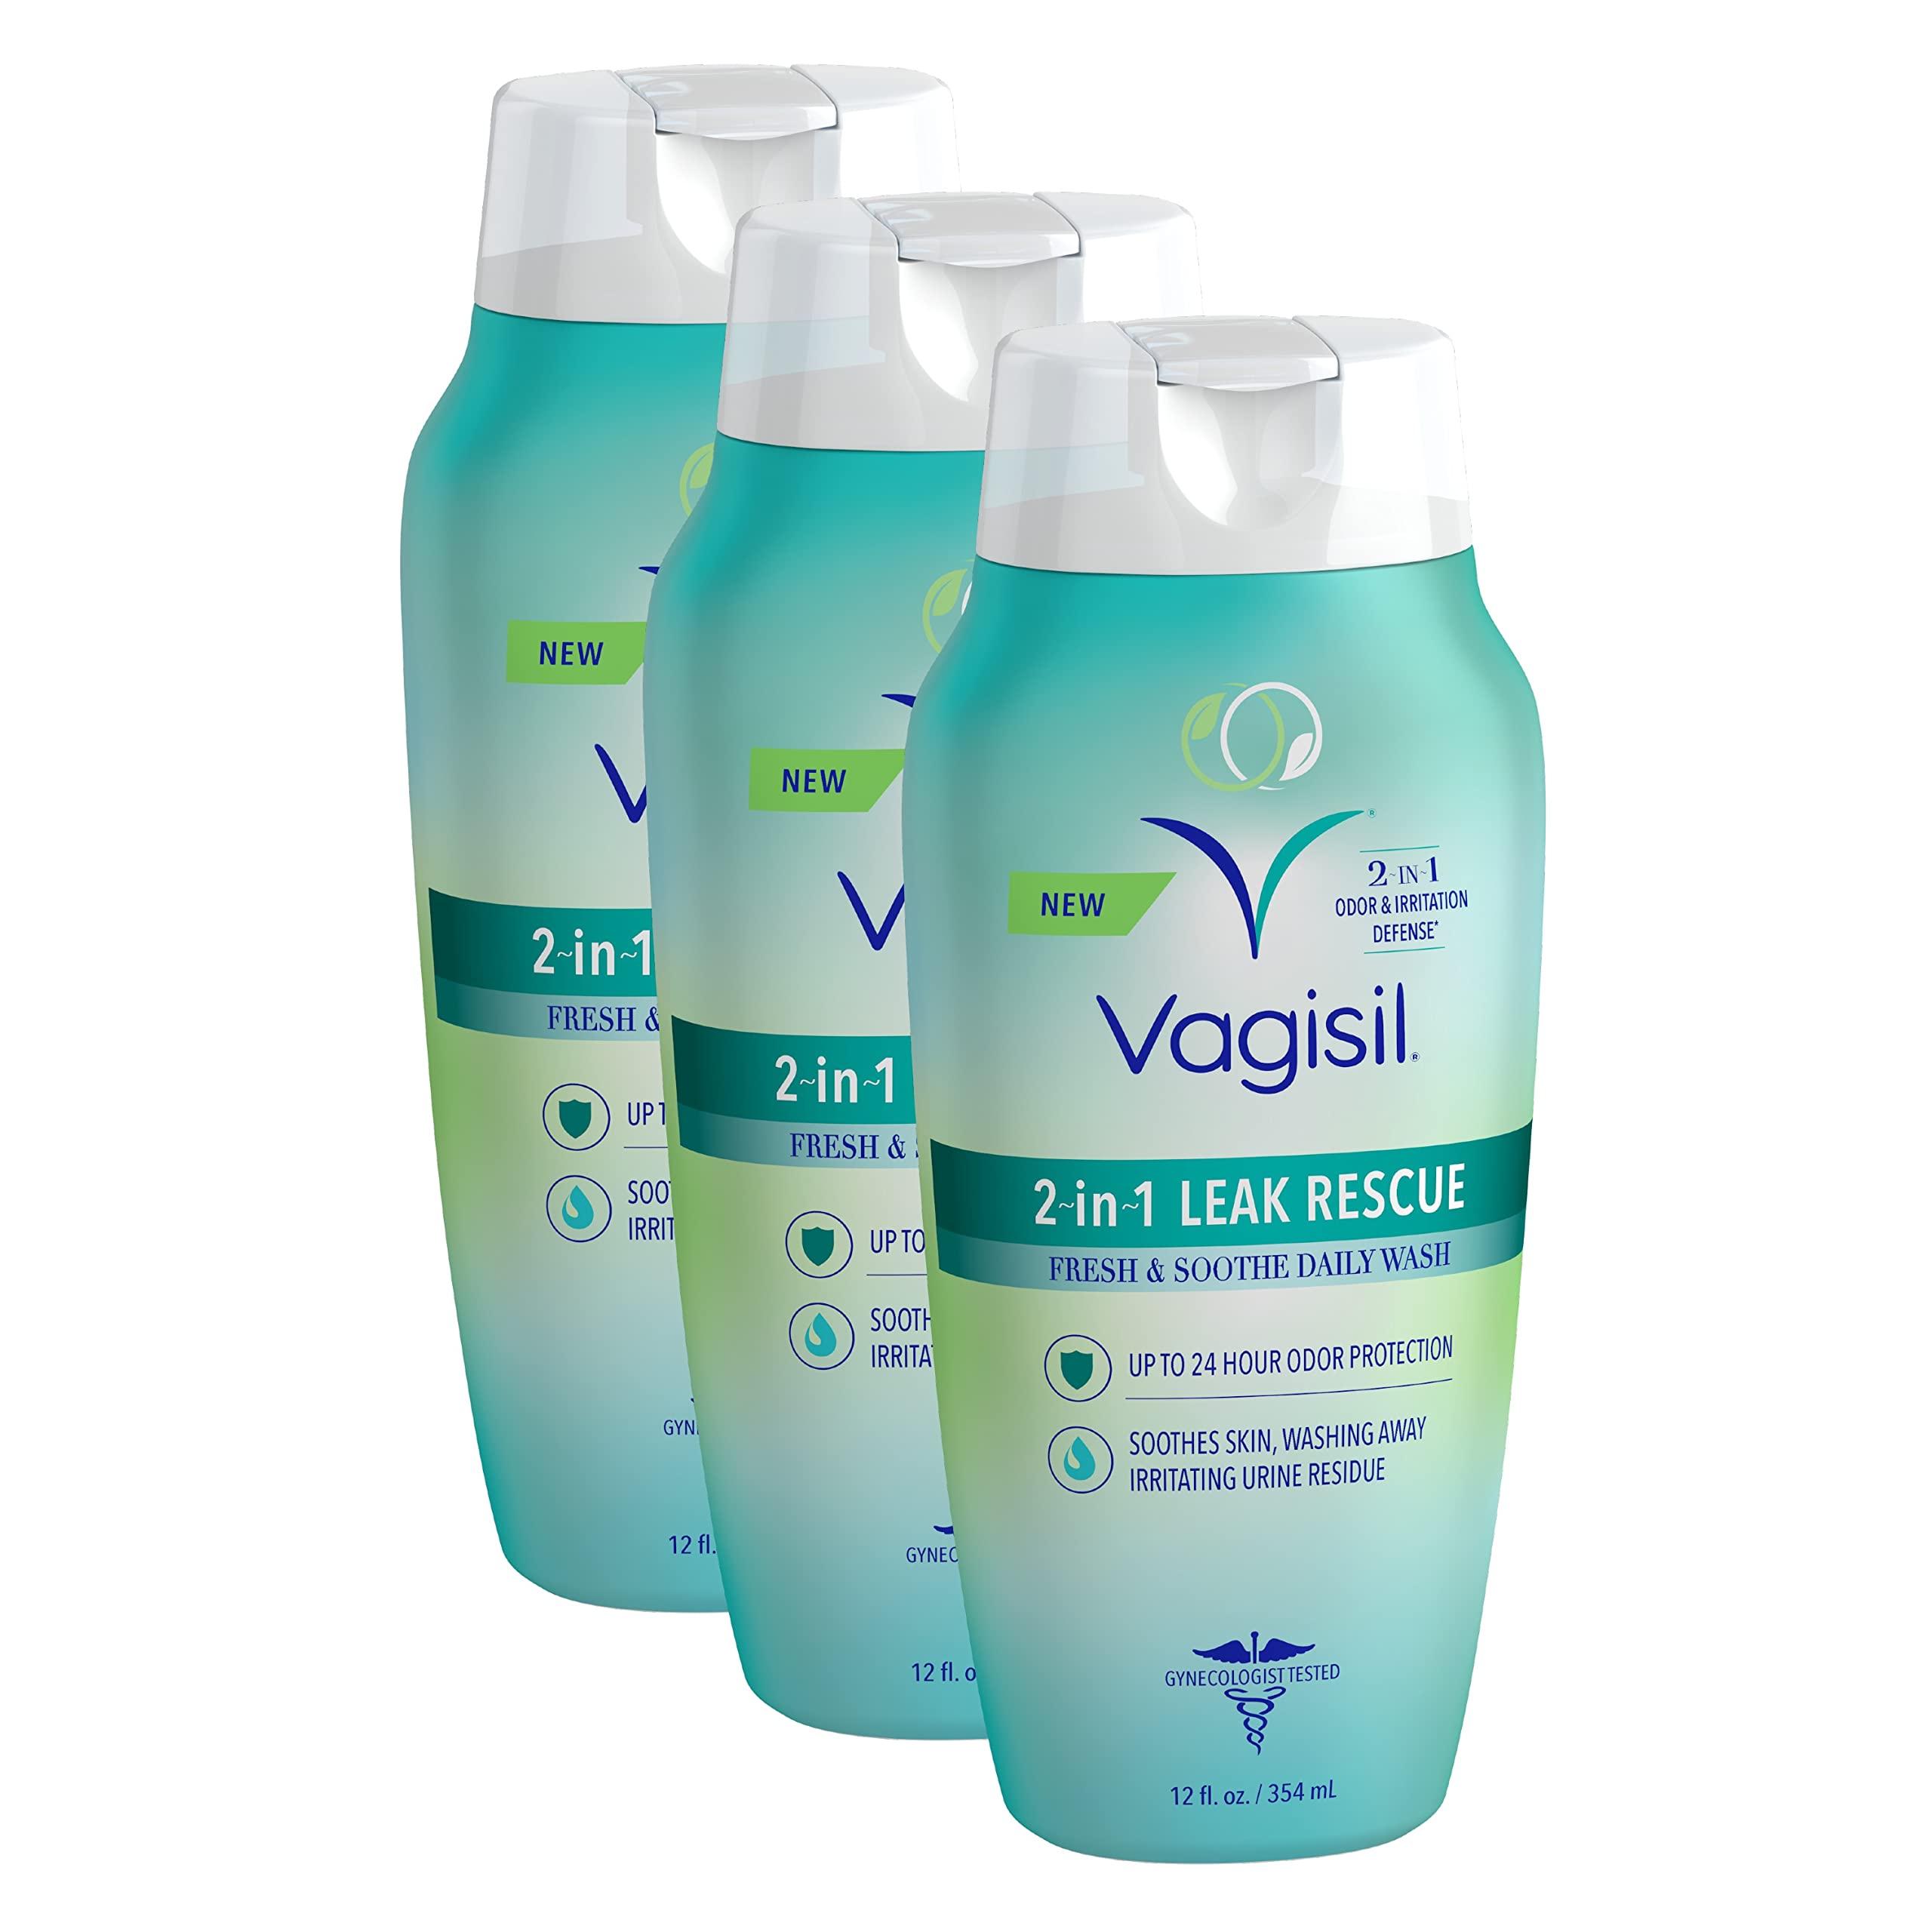 Vagisil 2-in-1 Leak Rescue Daily Intimate Feminine Wash for Women, Gynecologist Tested & Hypoallergenic, 12 oz (Pack of 3)